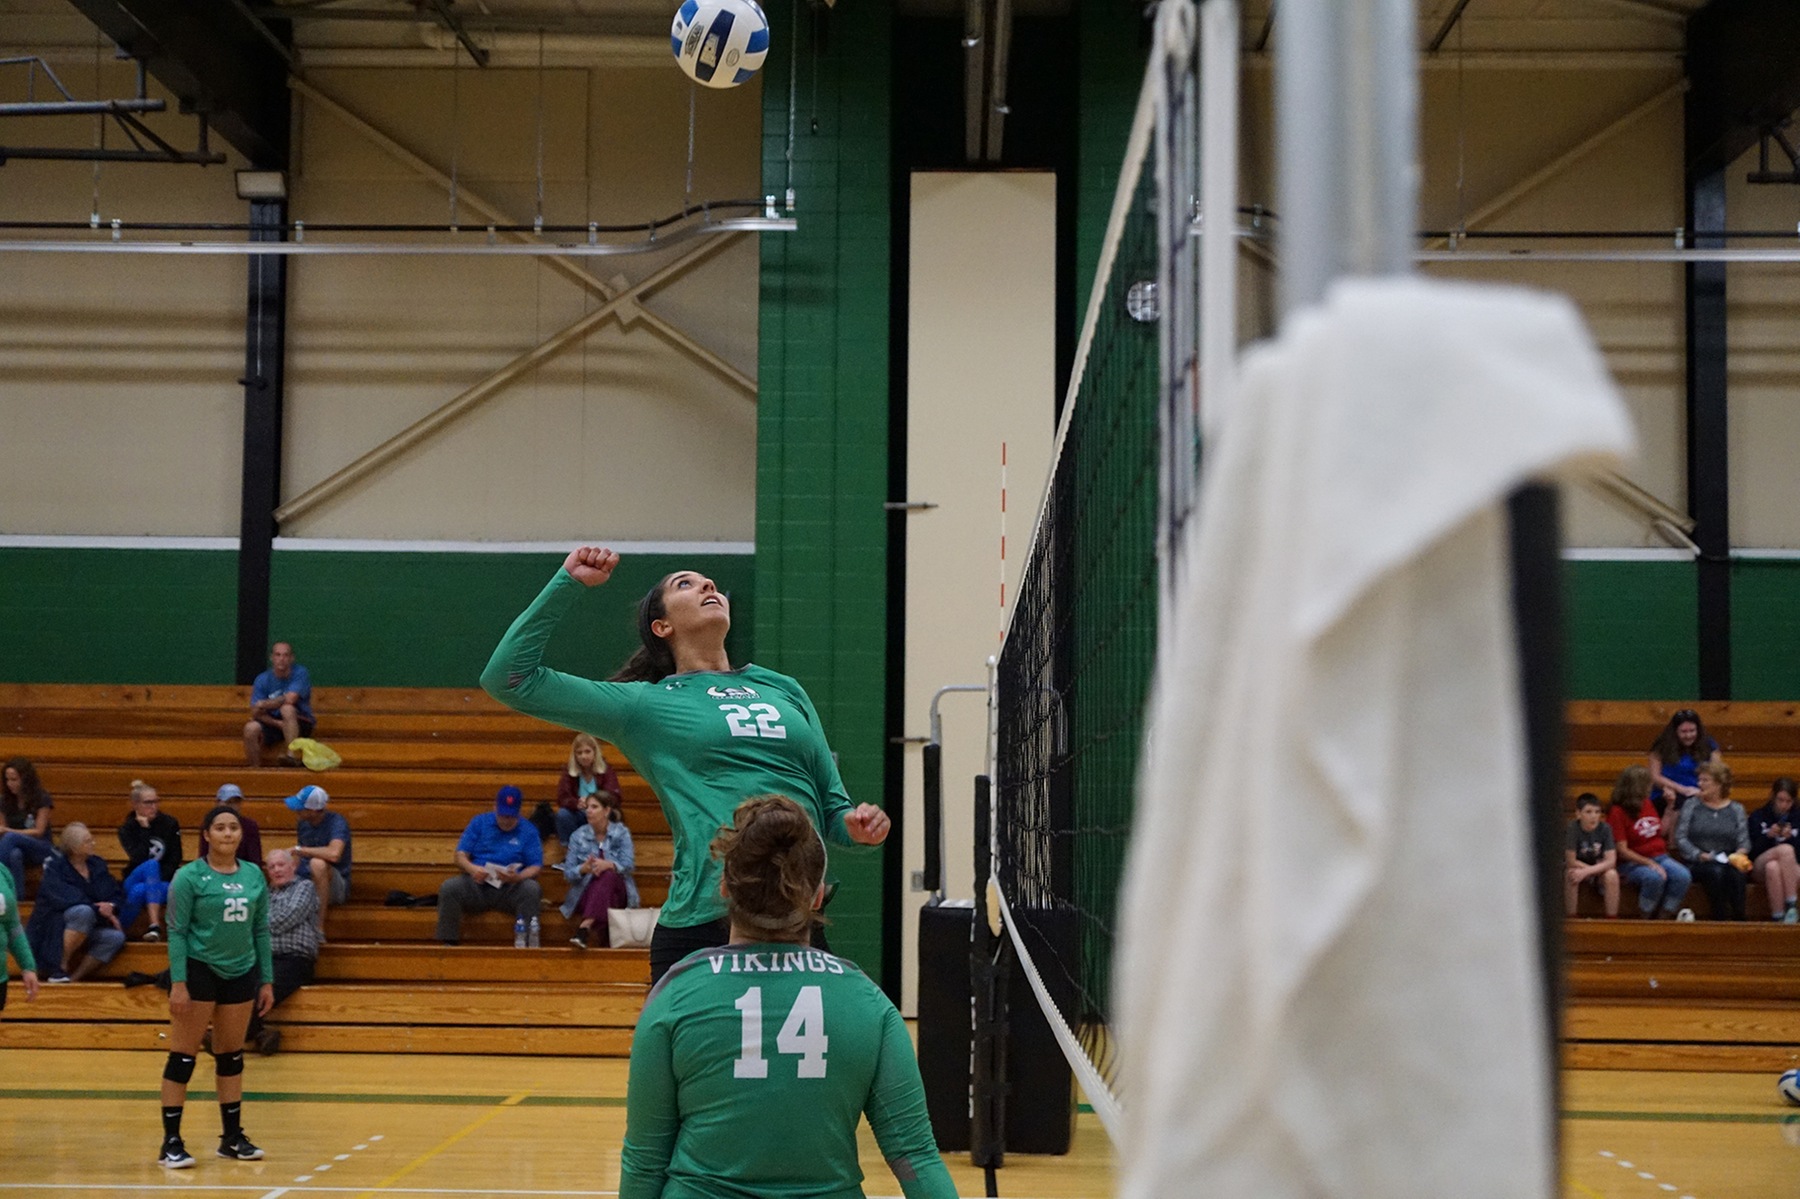 Vikings Volleyball Wins 5th Straight Match with Sweep of Brookdale CC